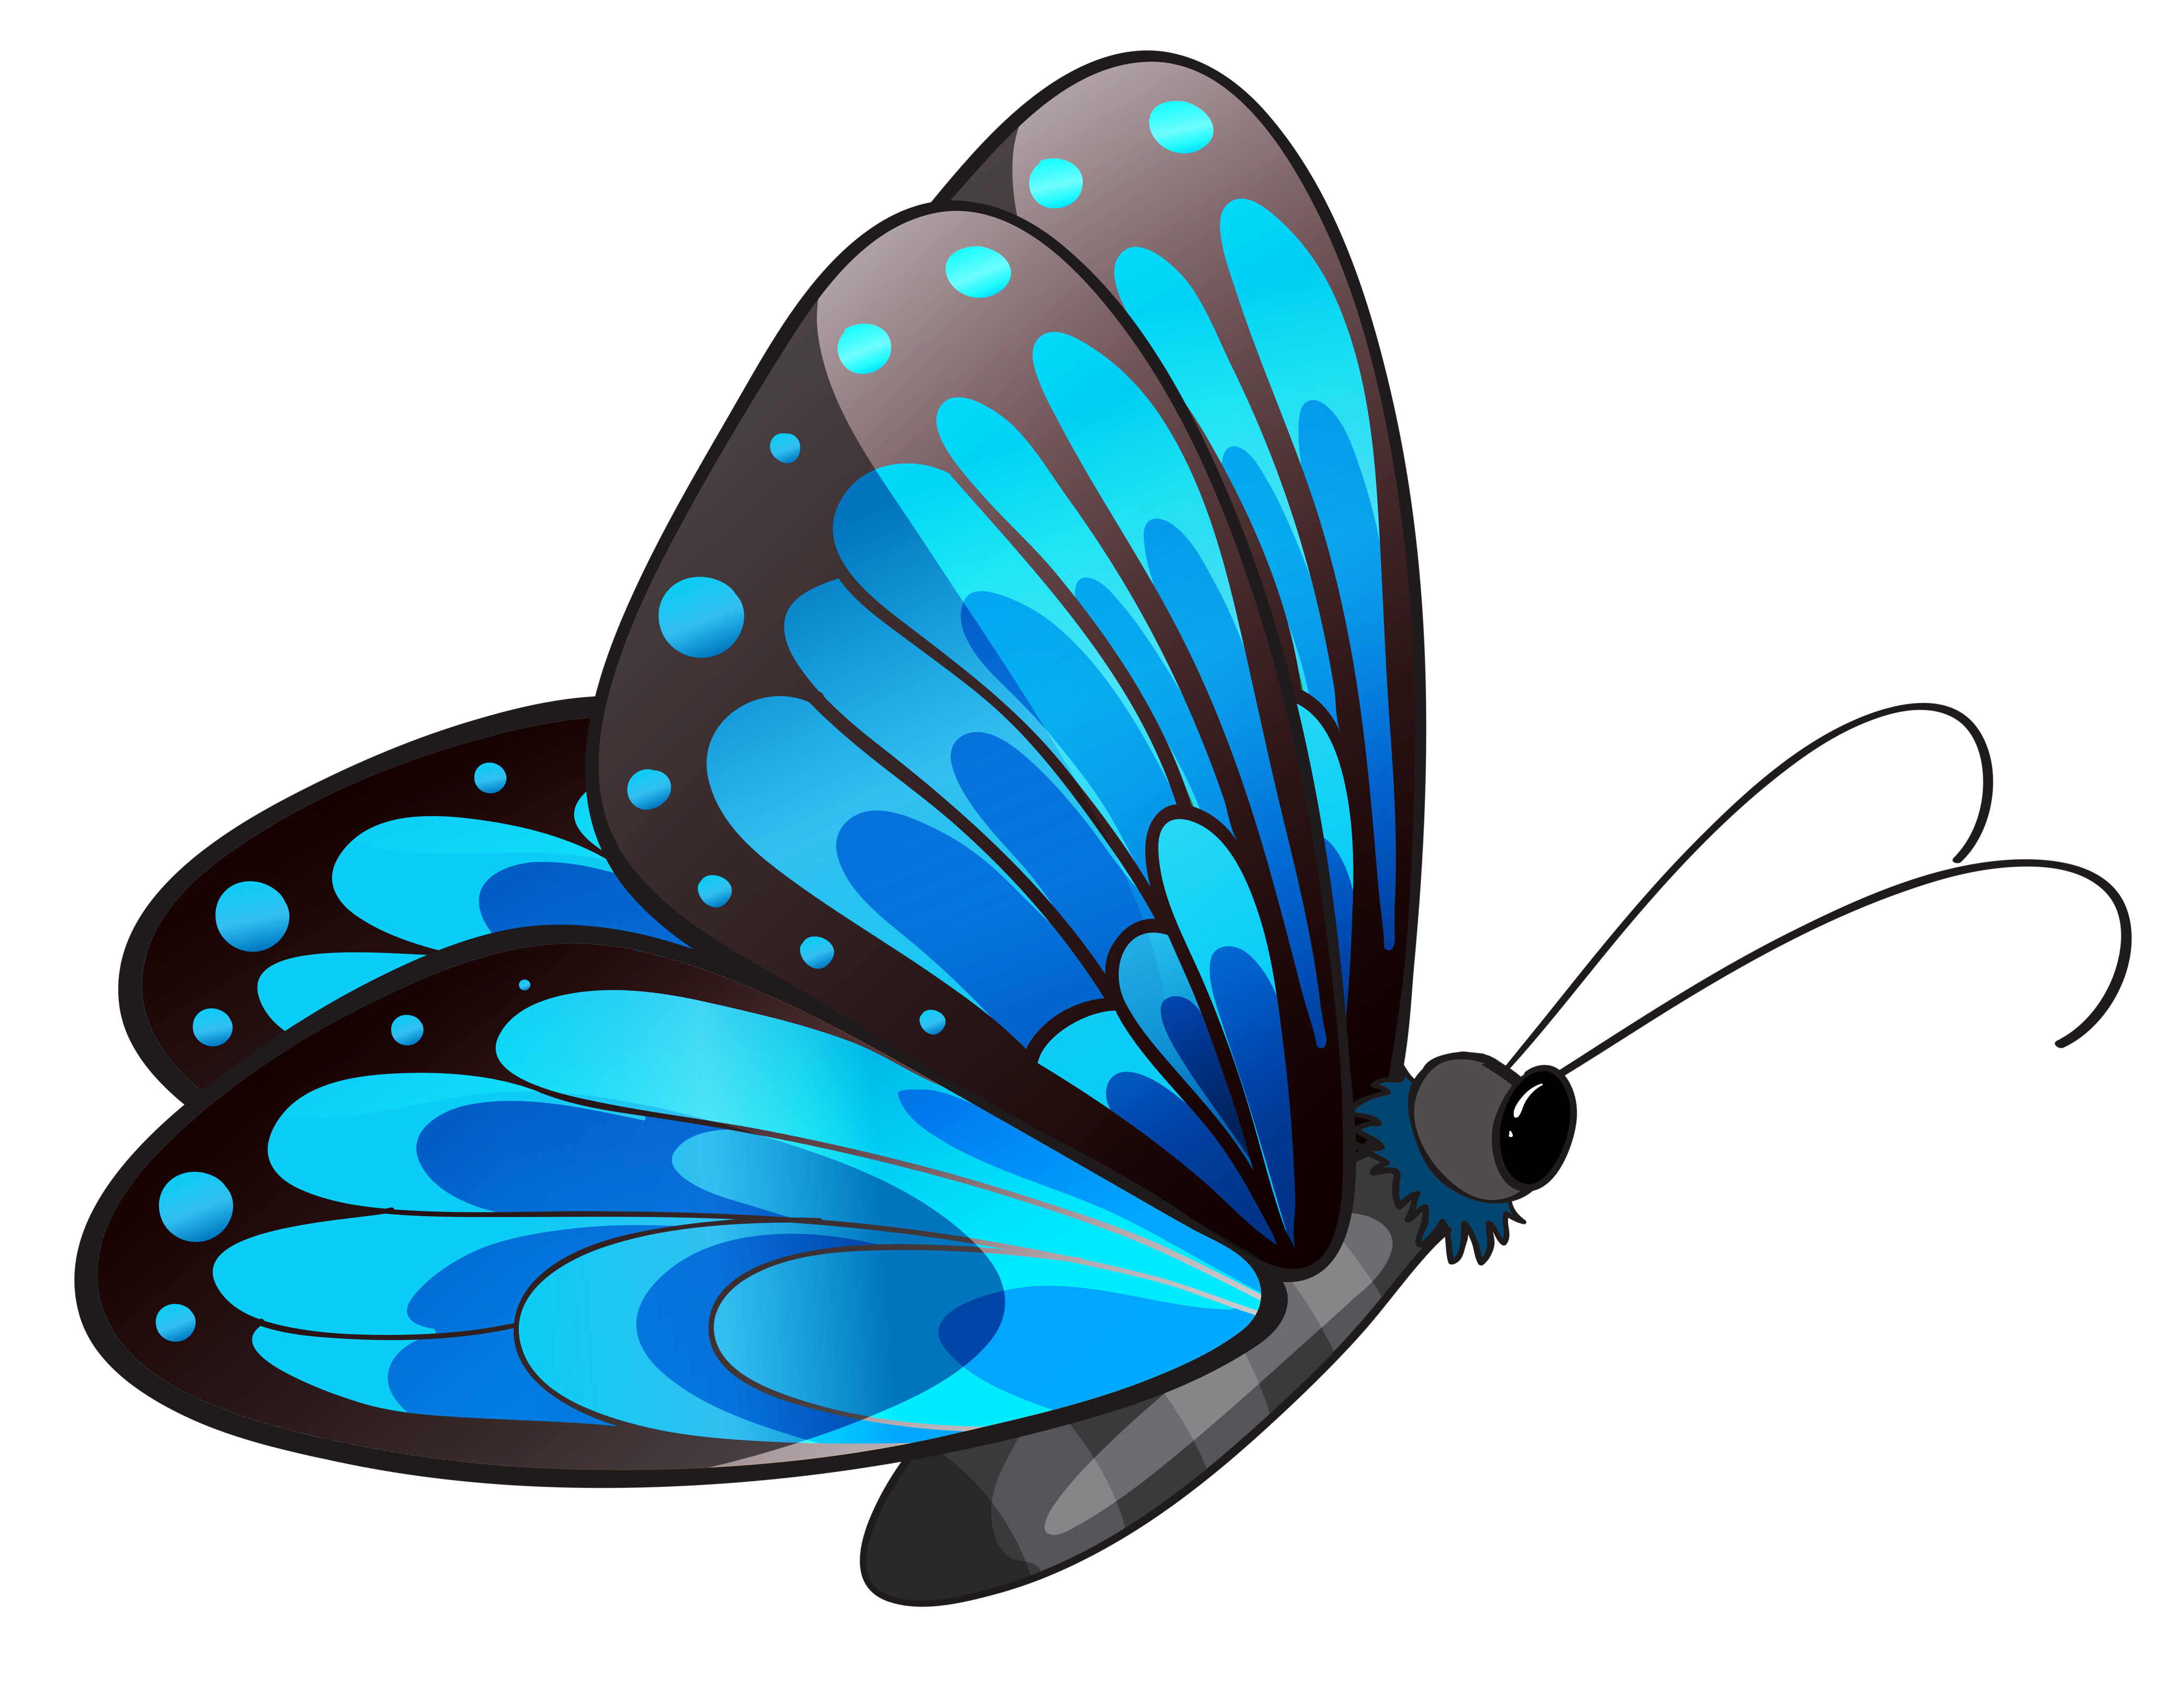 clipart butterfly spring